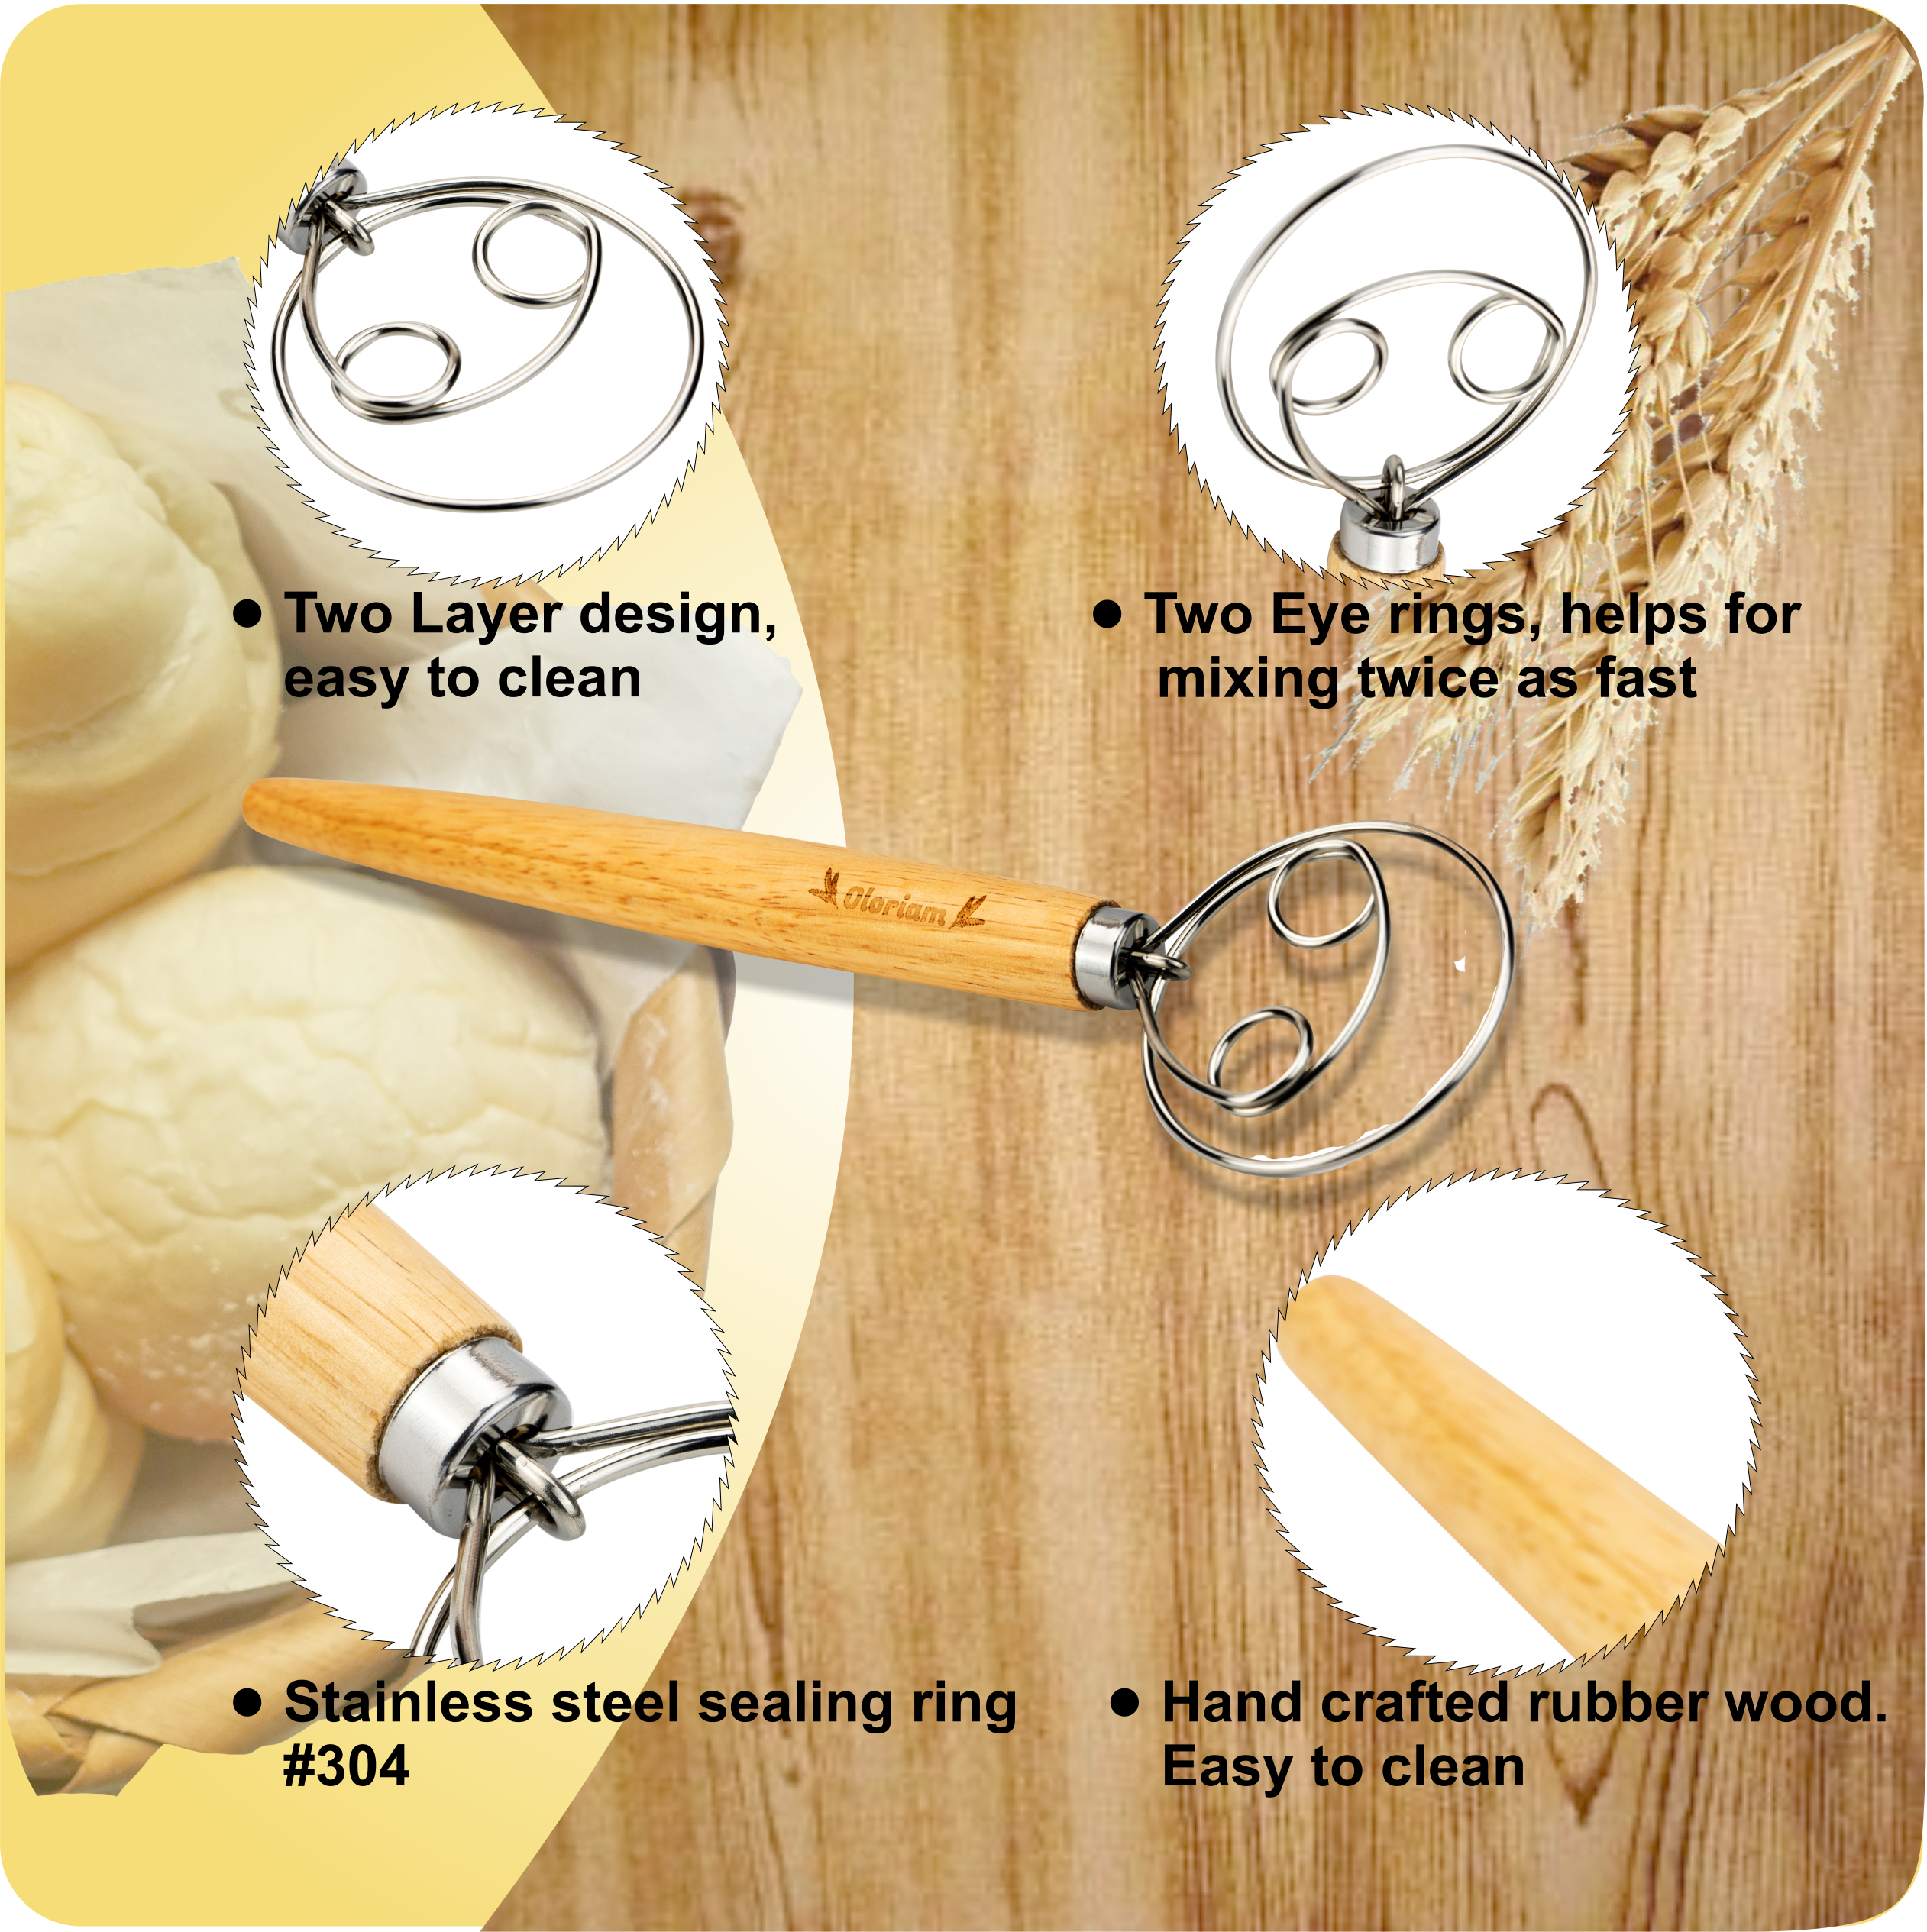 Bread Lame & Danish Dough Whisk set, Hand Crafted by Oloriam - P – Zen Maestro